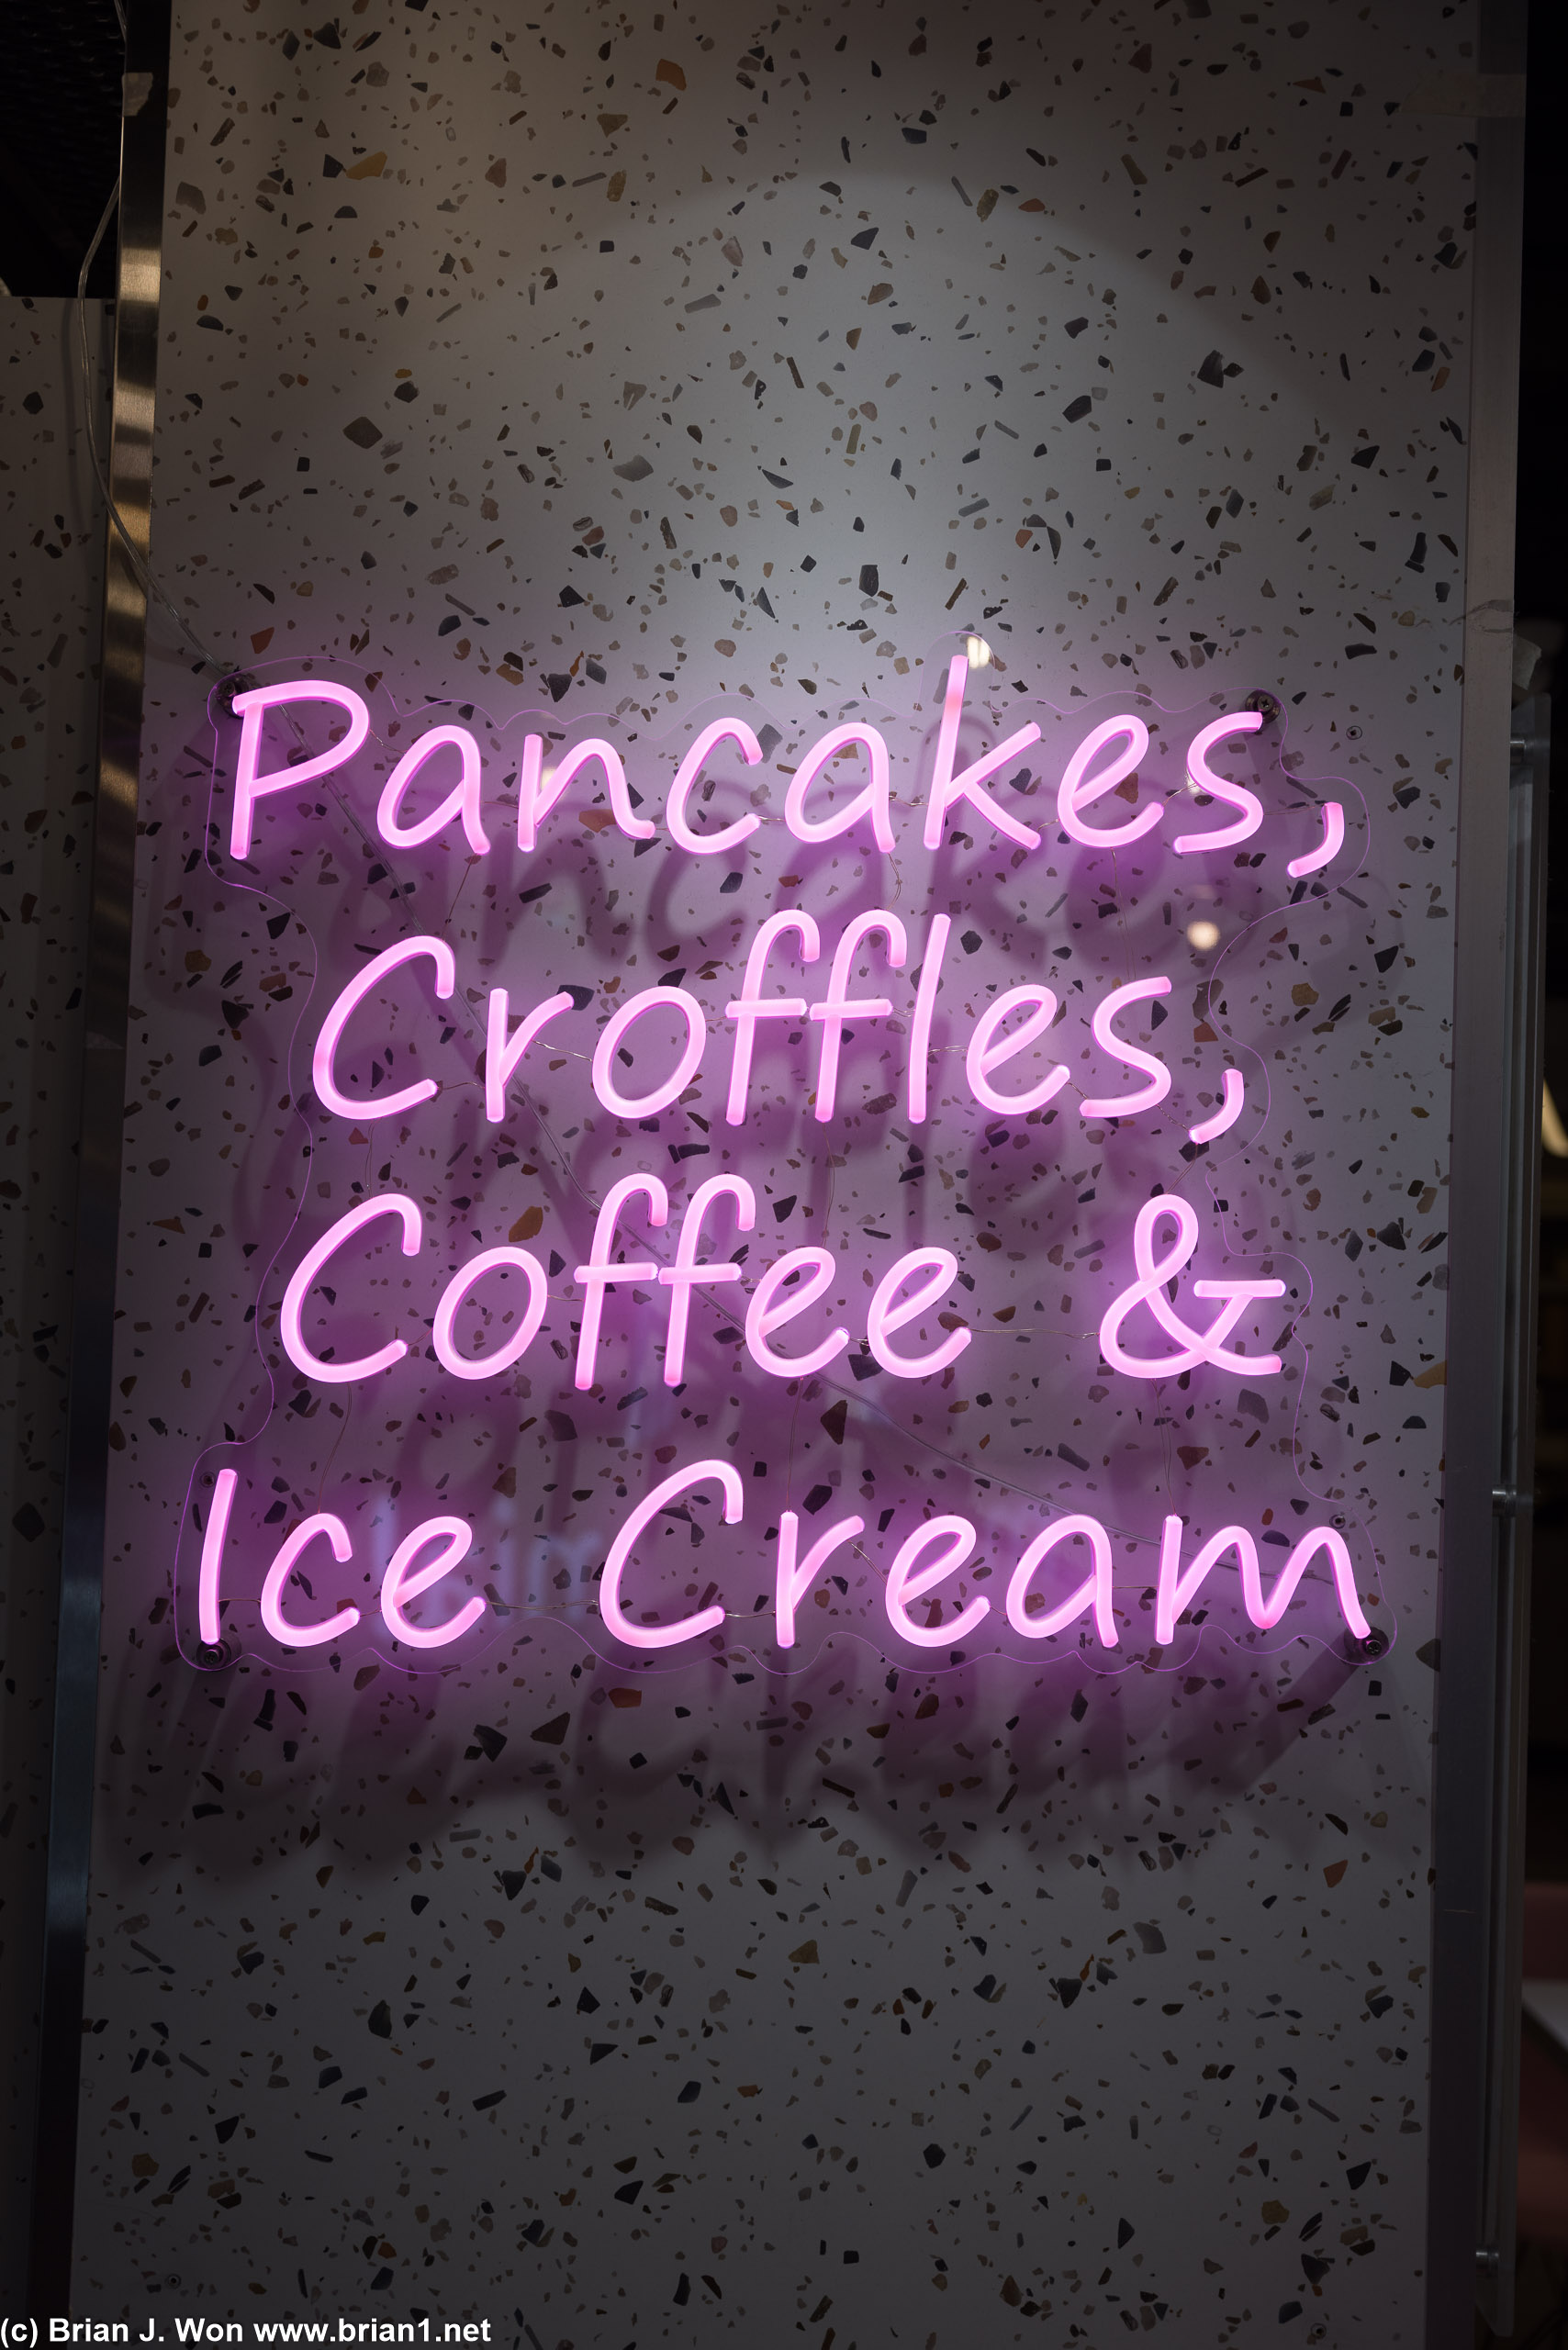 Pancakes, Croffles, Coffee, and Ice Cream is their sign.